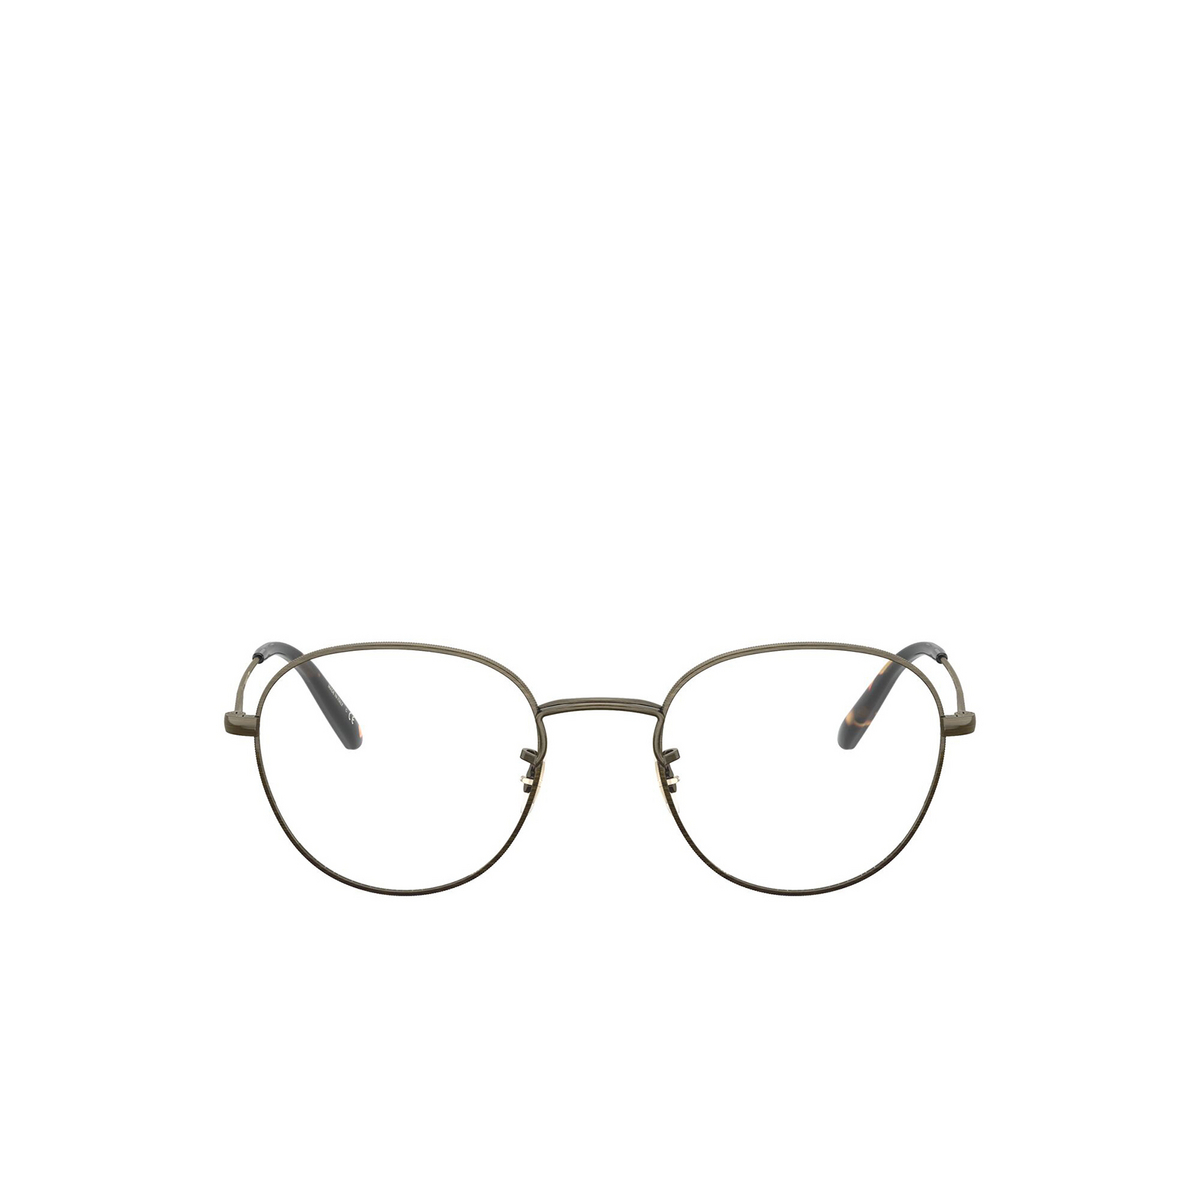 Oliver Peoples® Round Eyeglasses: Piercy OV1281 color Antique Gold 5284 - front view.